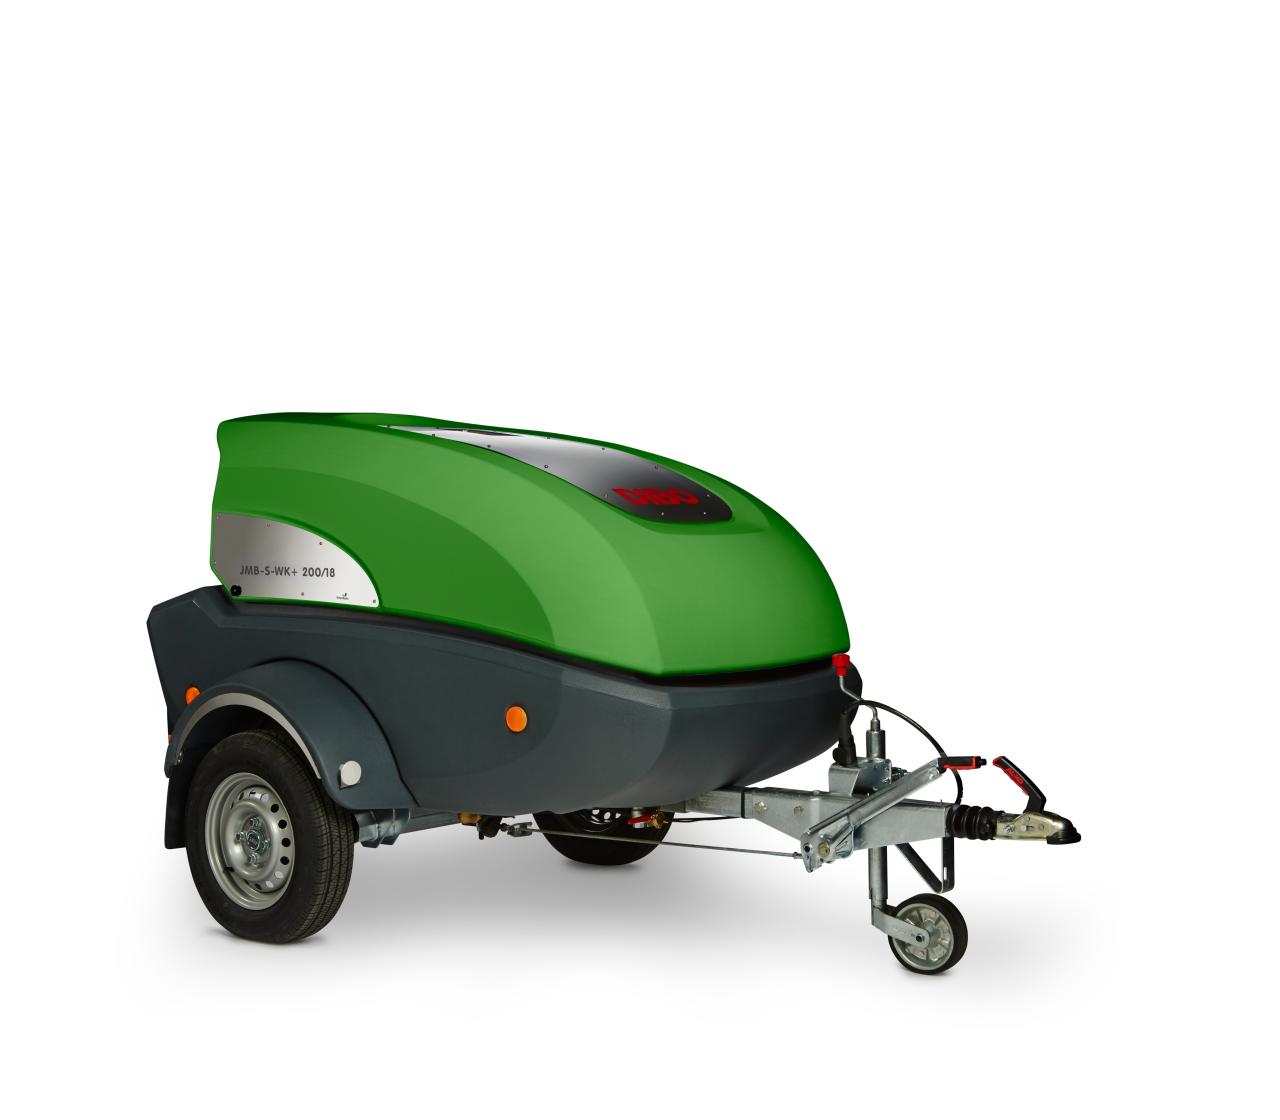 DiBO JMB-S-WK+ compact eco-friendly moss & weed killer on trailer equipped with the most modern & green technologies